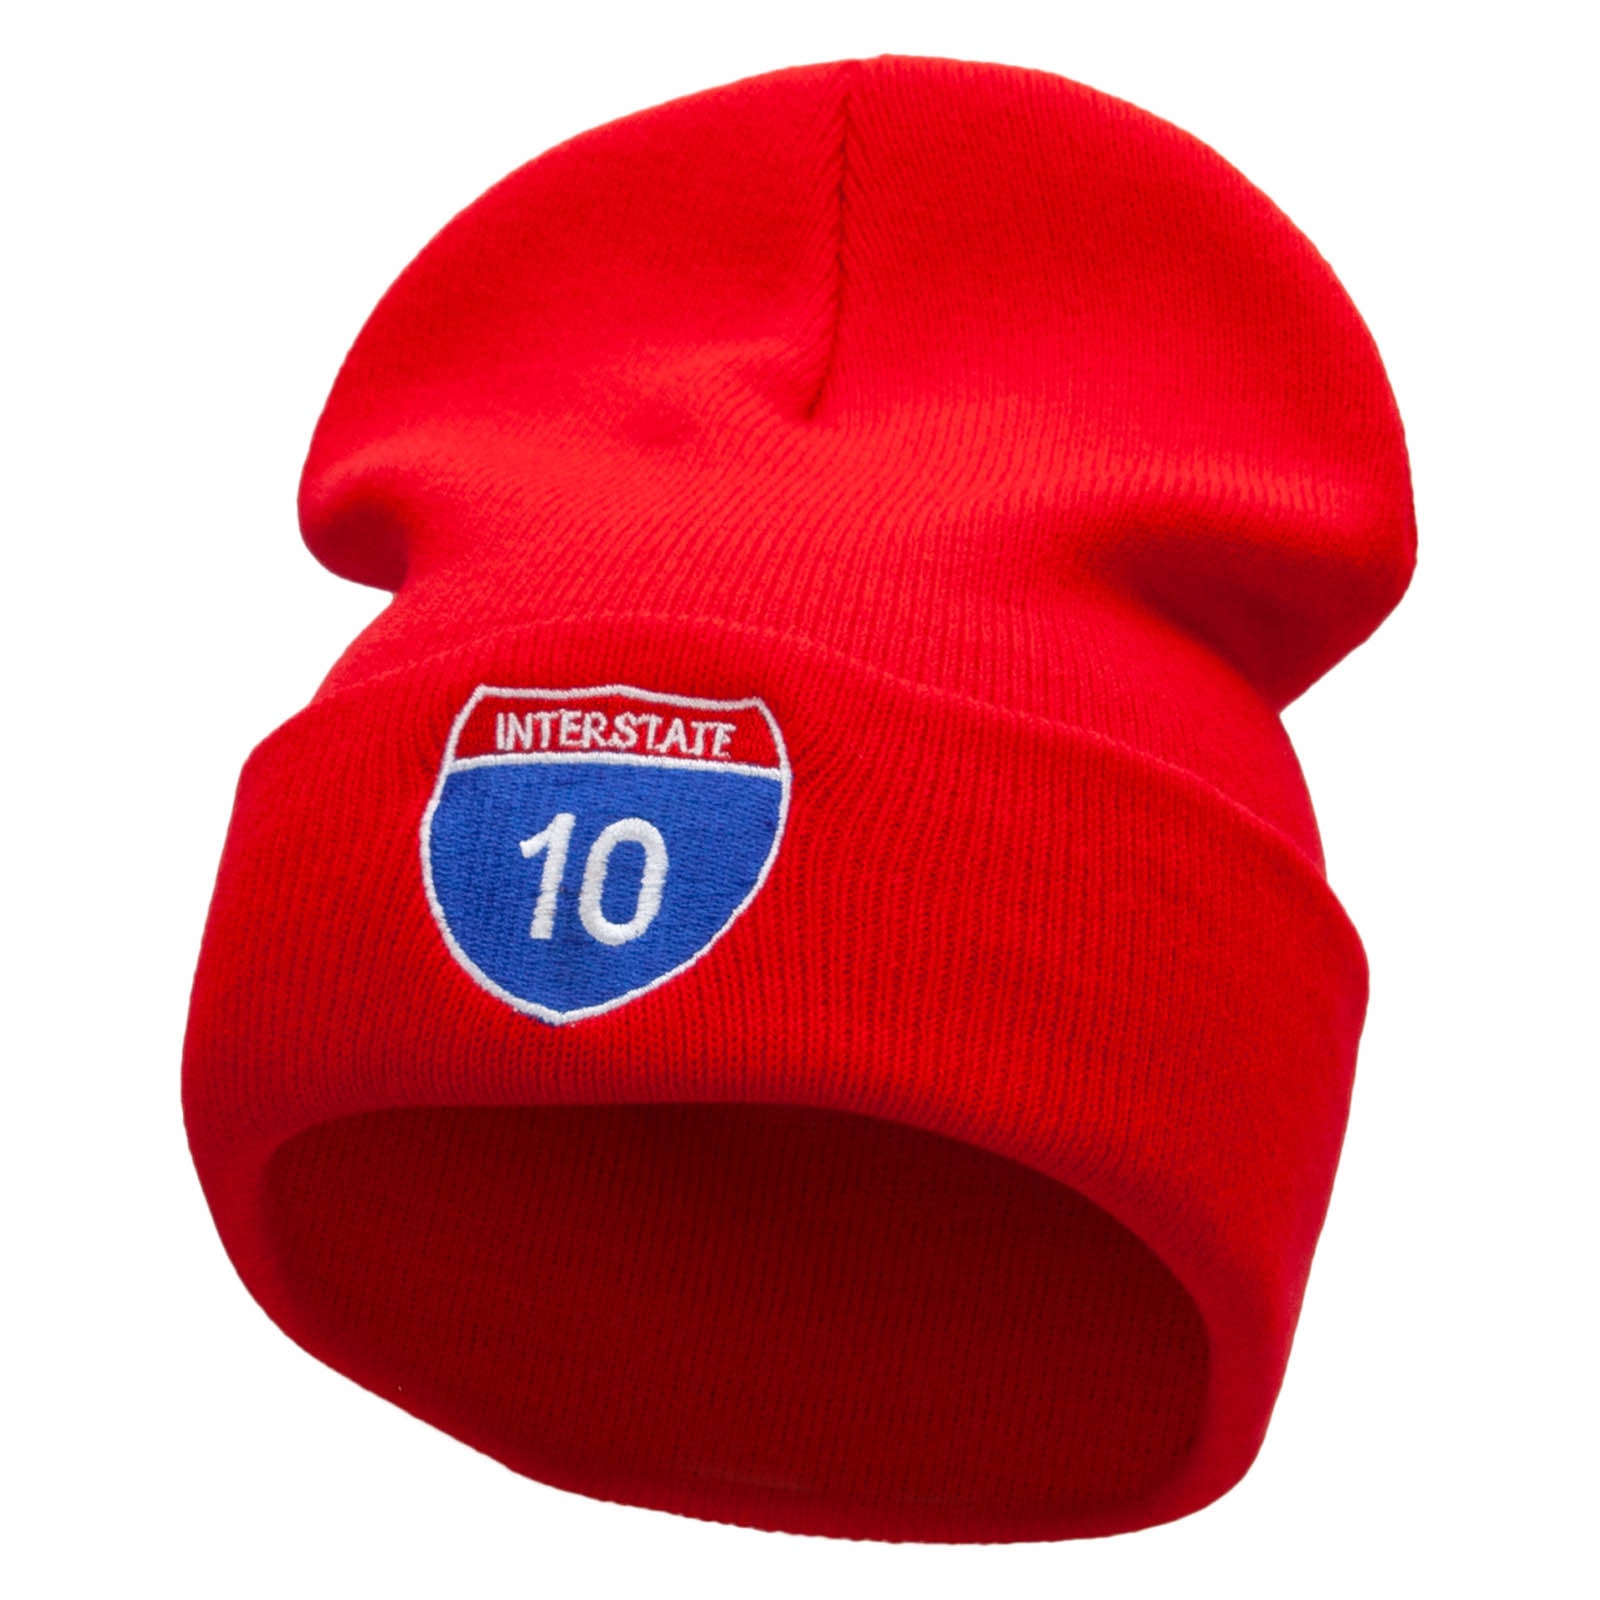 Interstate 10 Sign Embroidered 12 Inch Long Knitted Beanie - Red OSFM